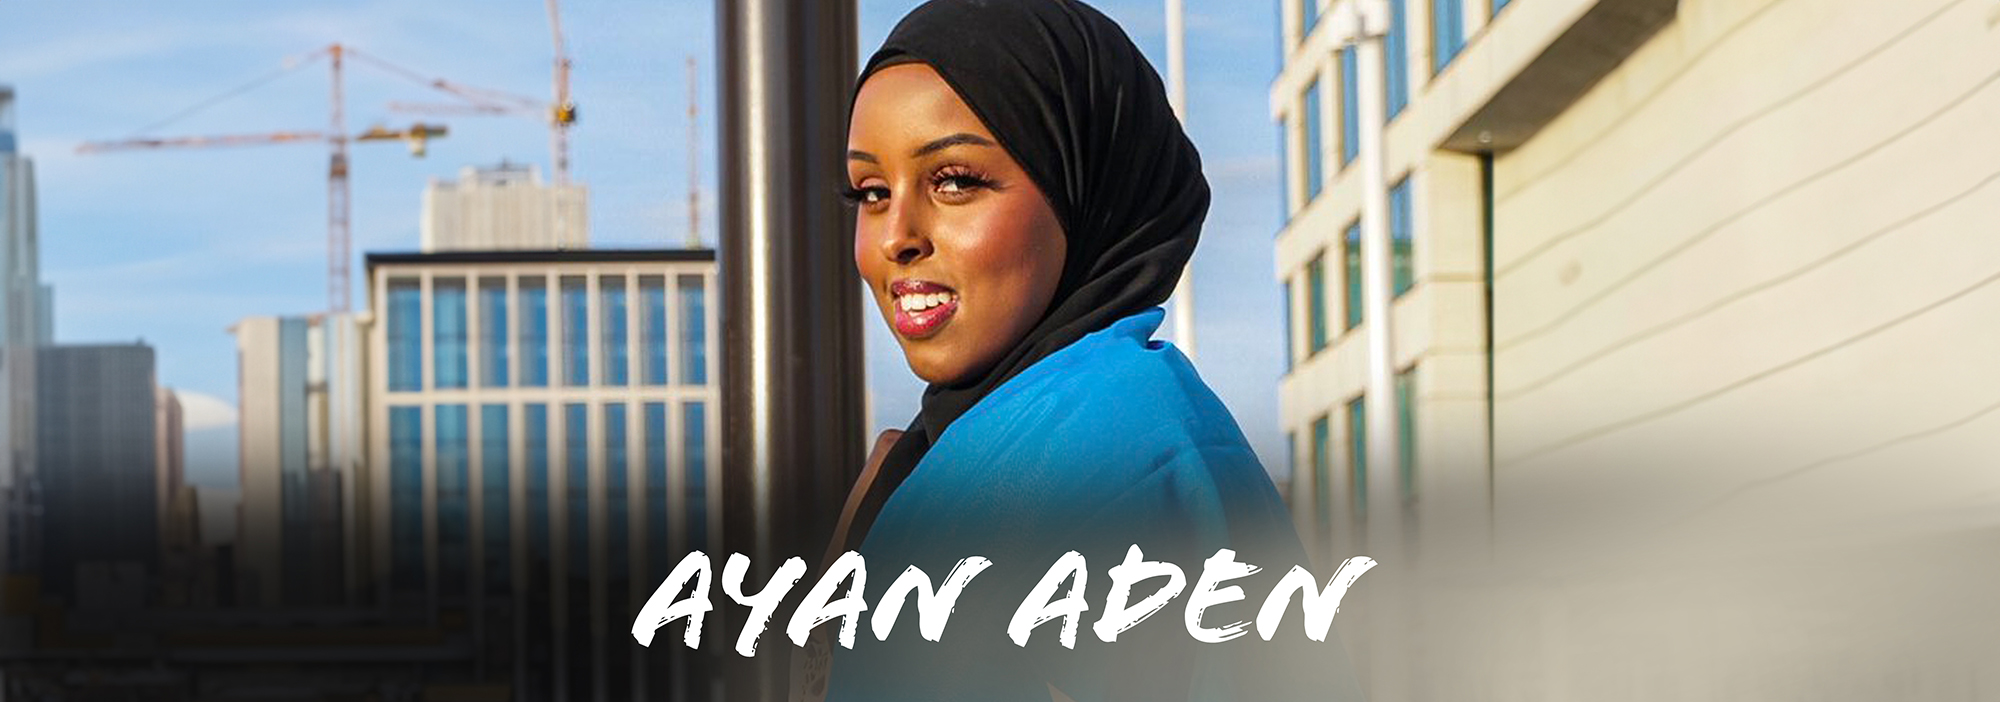 A young female of dual Somali / English identity, wearing a head scarf and she has the Somali flag draped around her shoulders. She is standing in front of a modern city background with a bright blue sky. She is smiling and facing the camera.